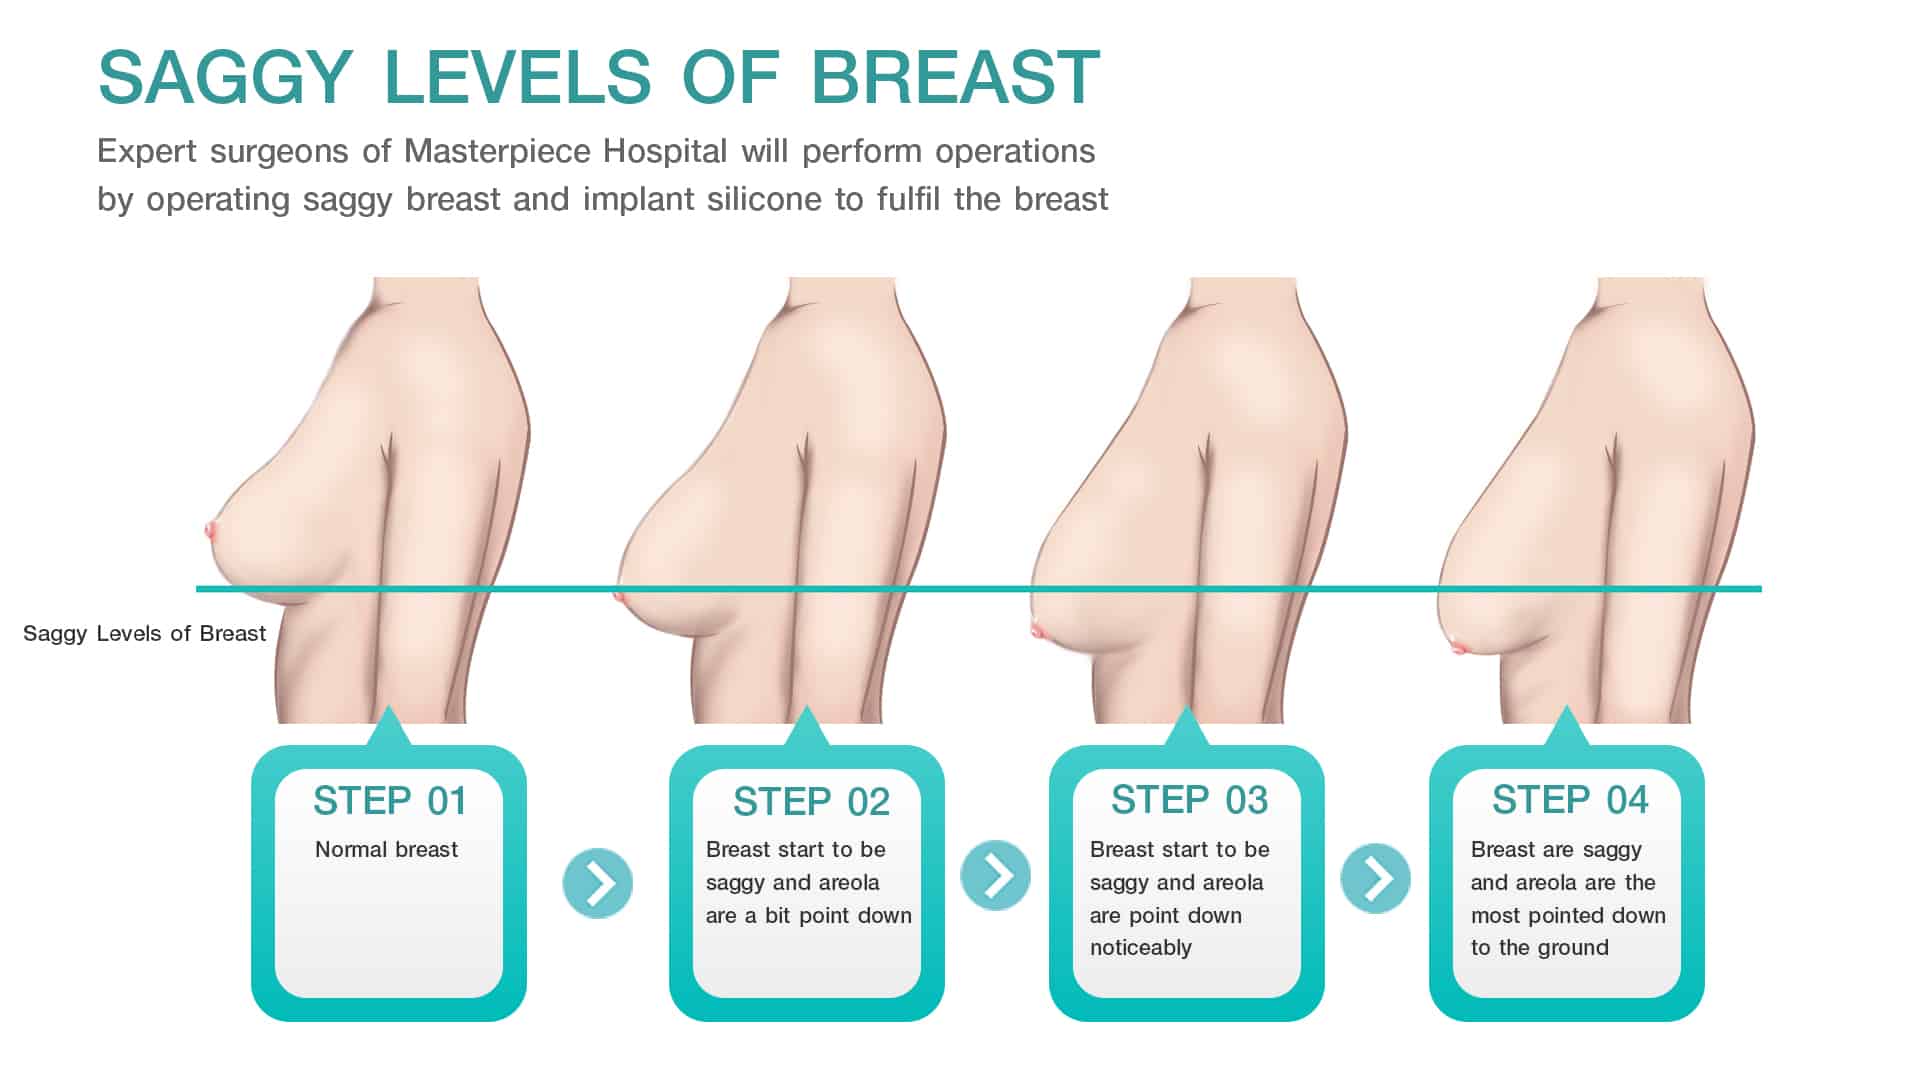 Saggy Levels of Breast